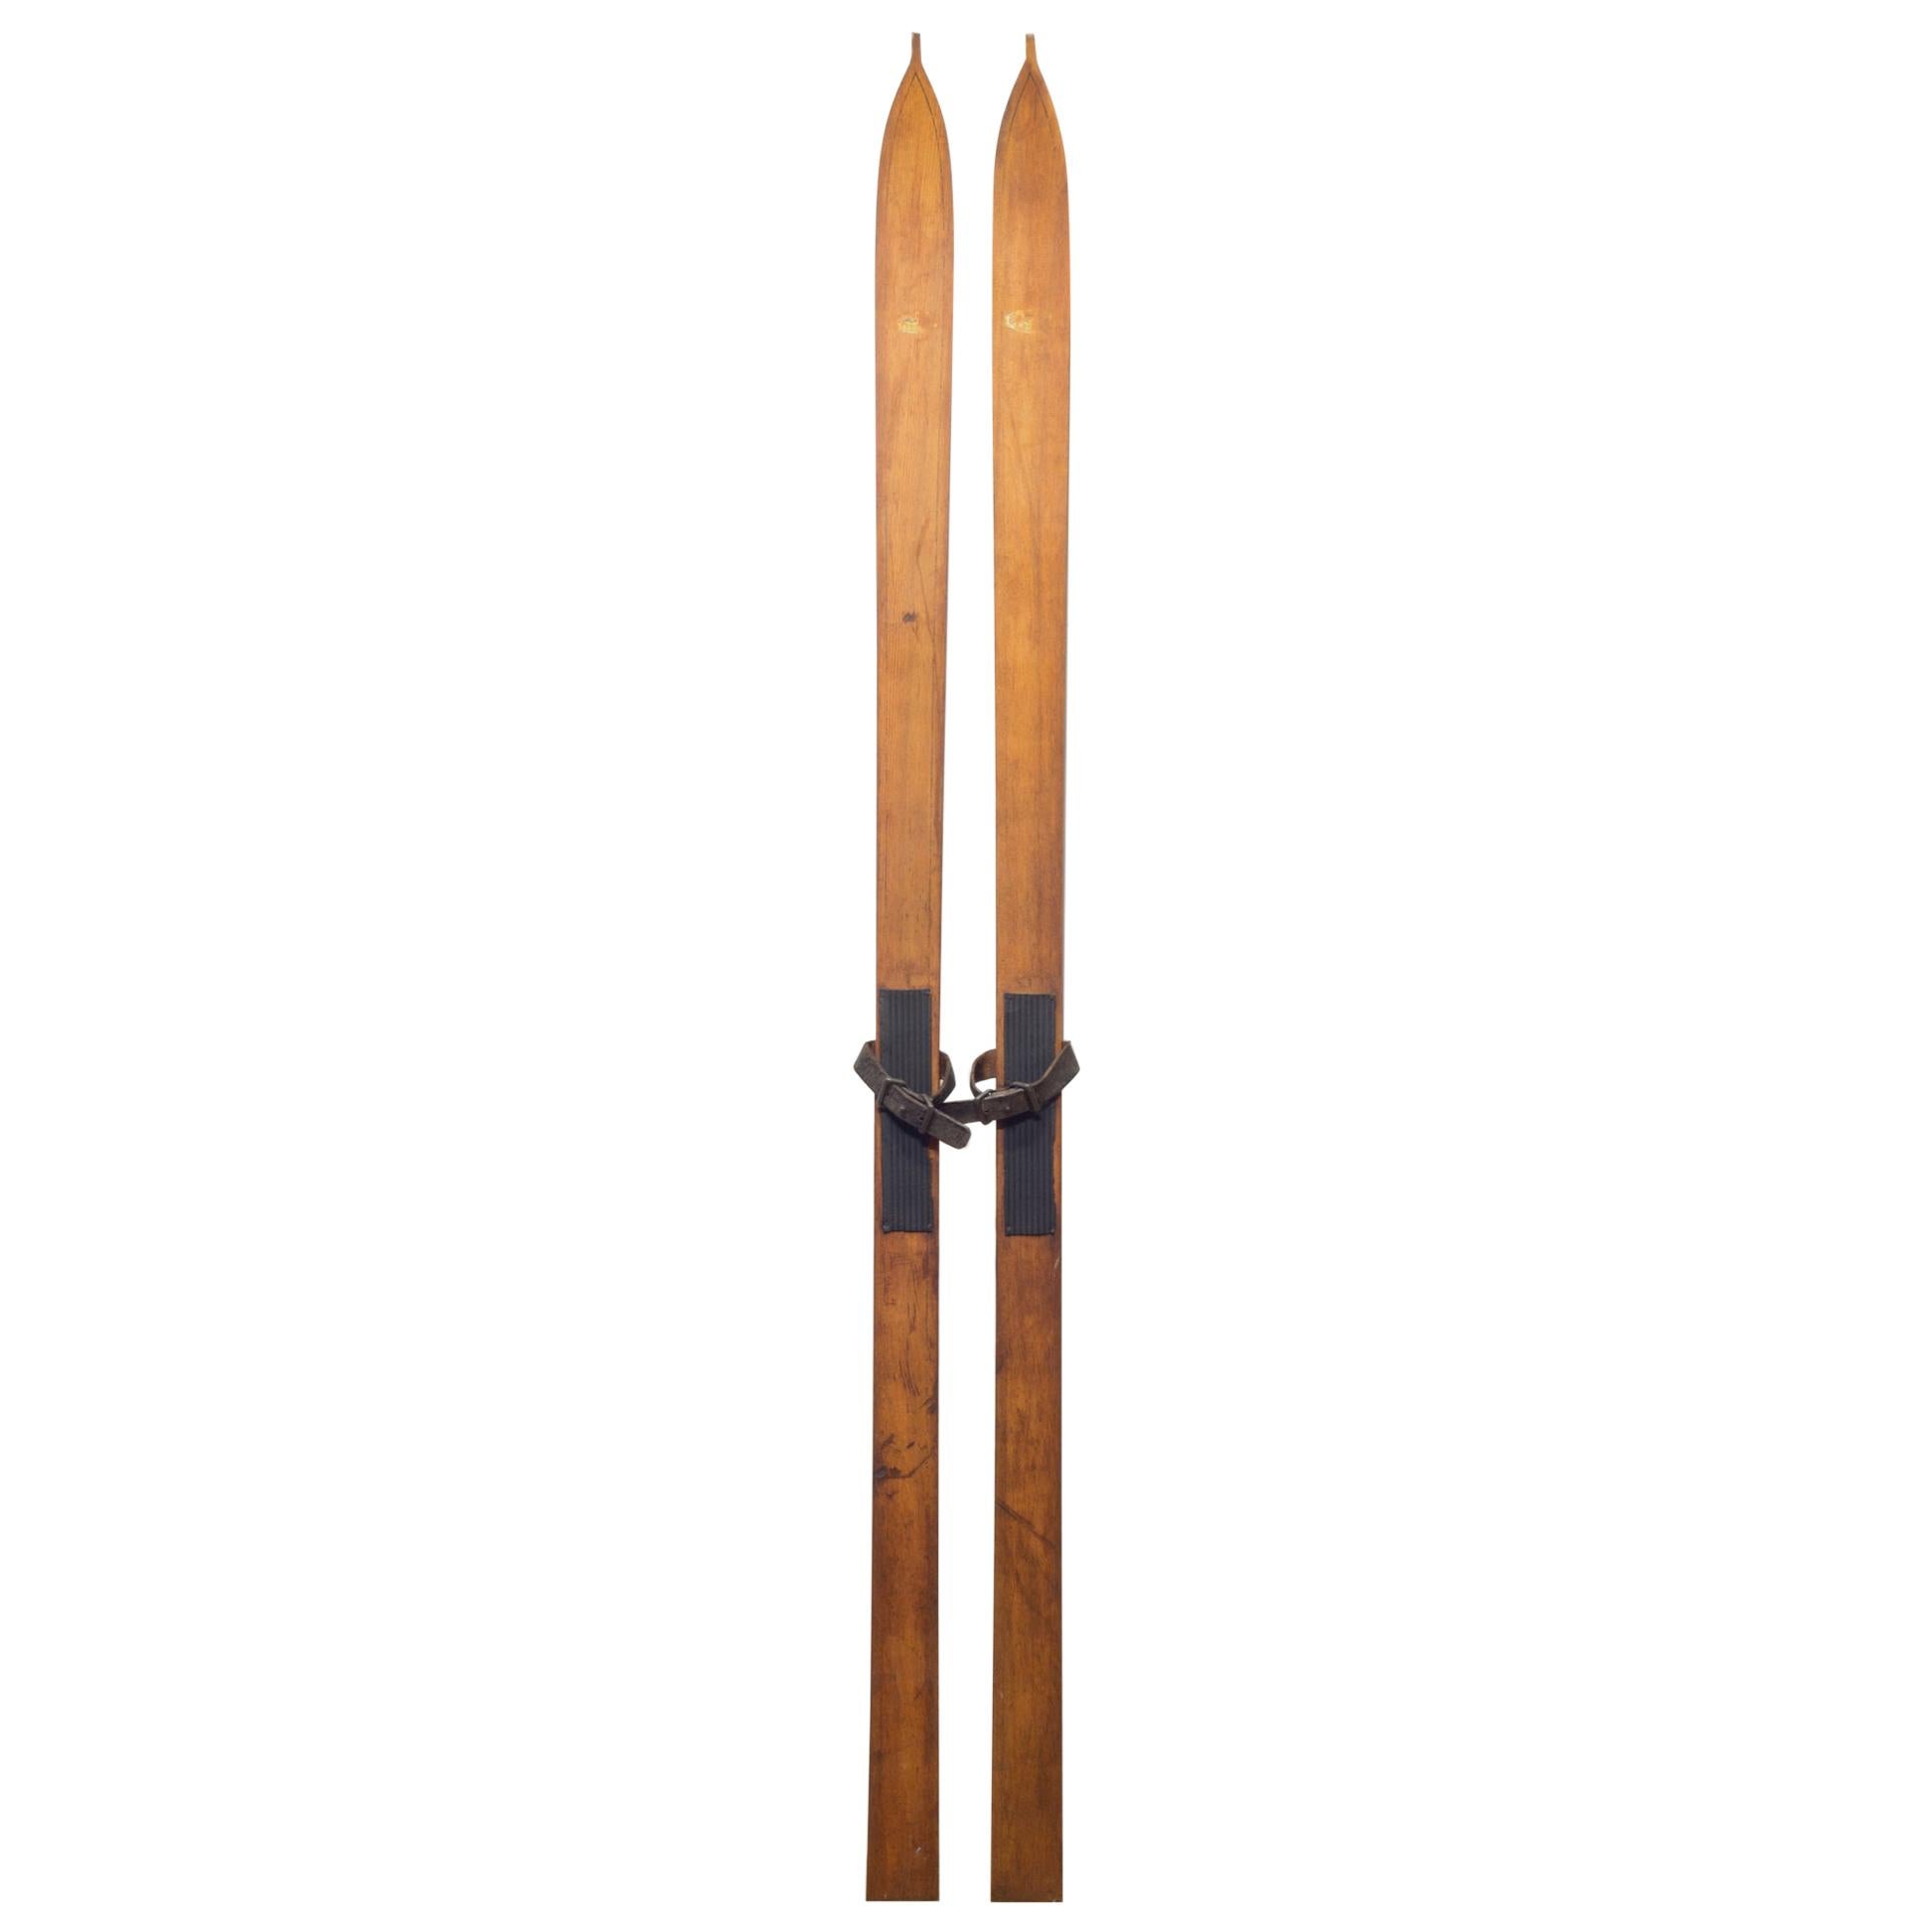 Antique Wood and Leather Skiis, circa 1930-1940